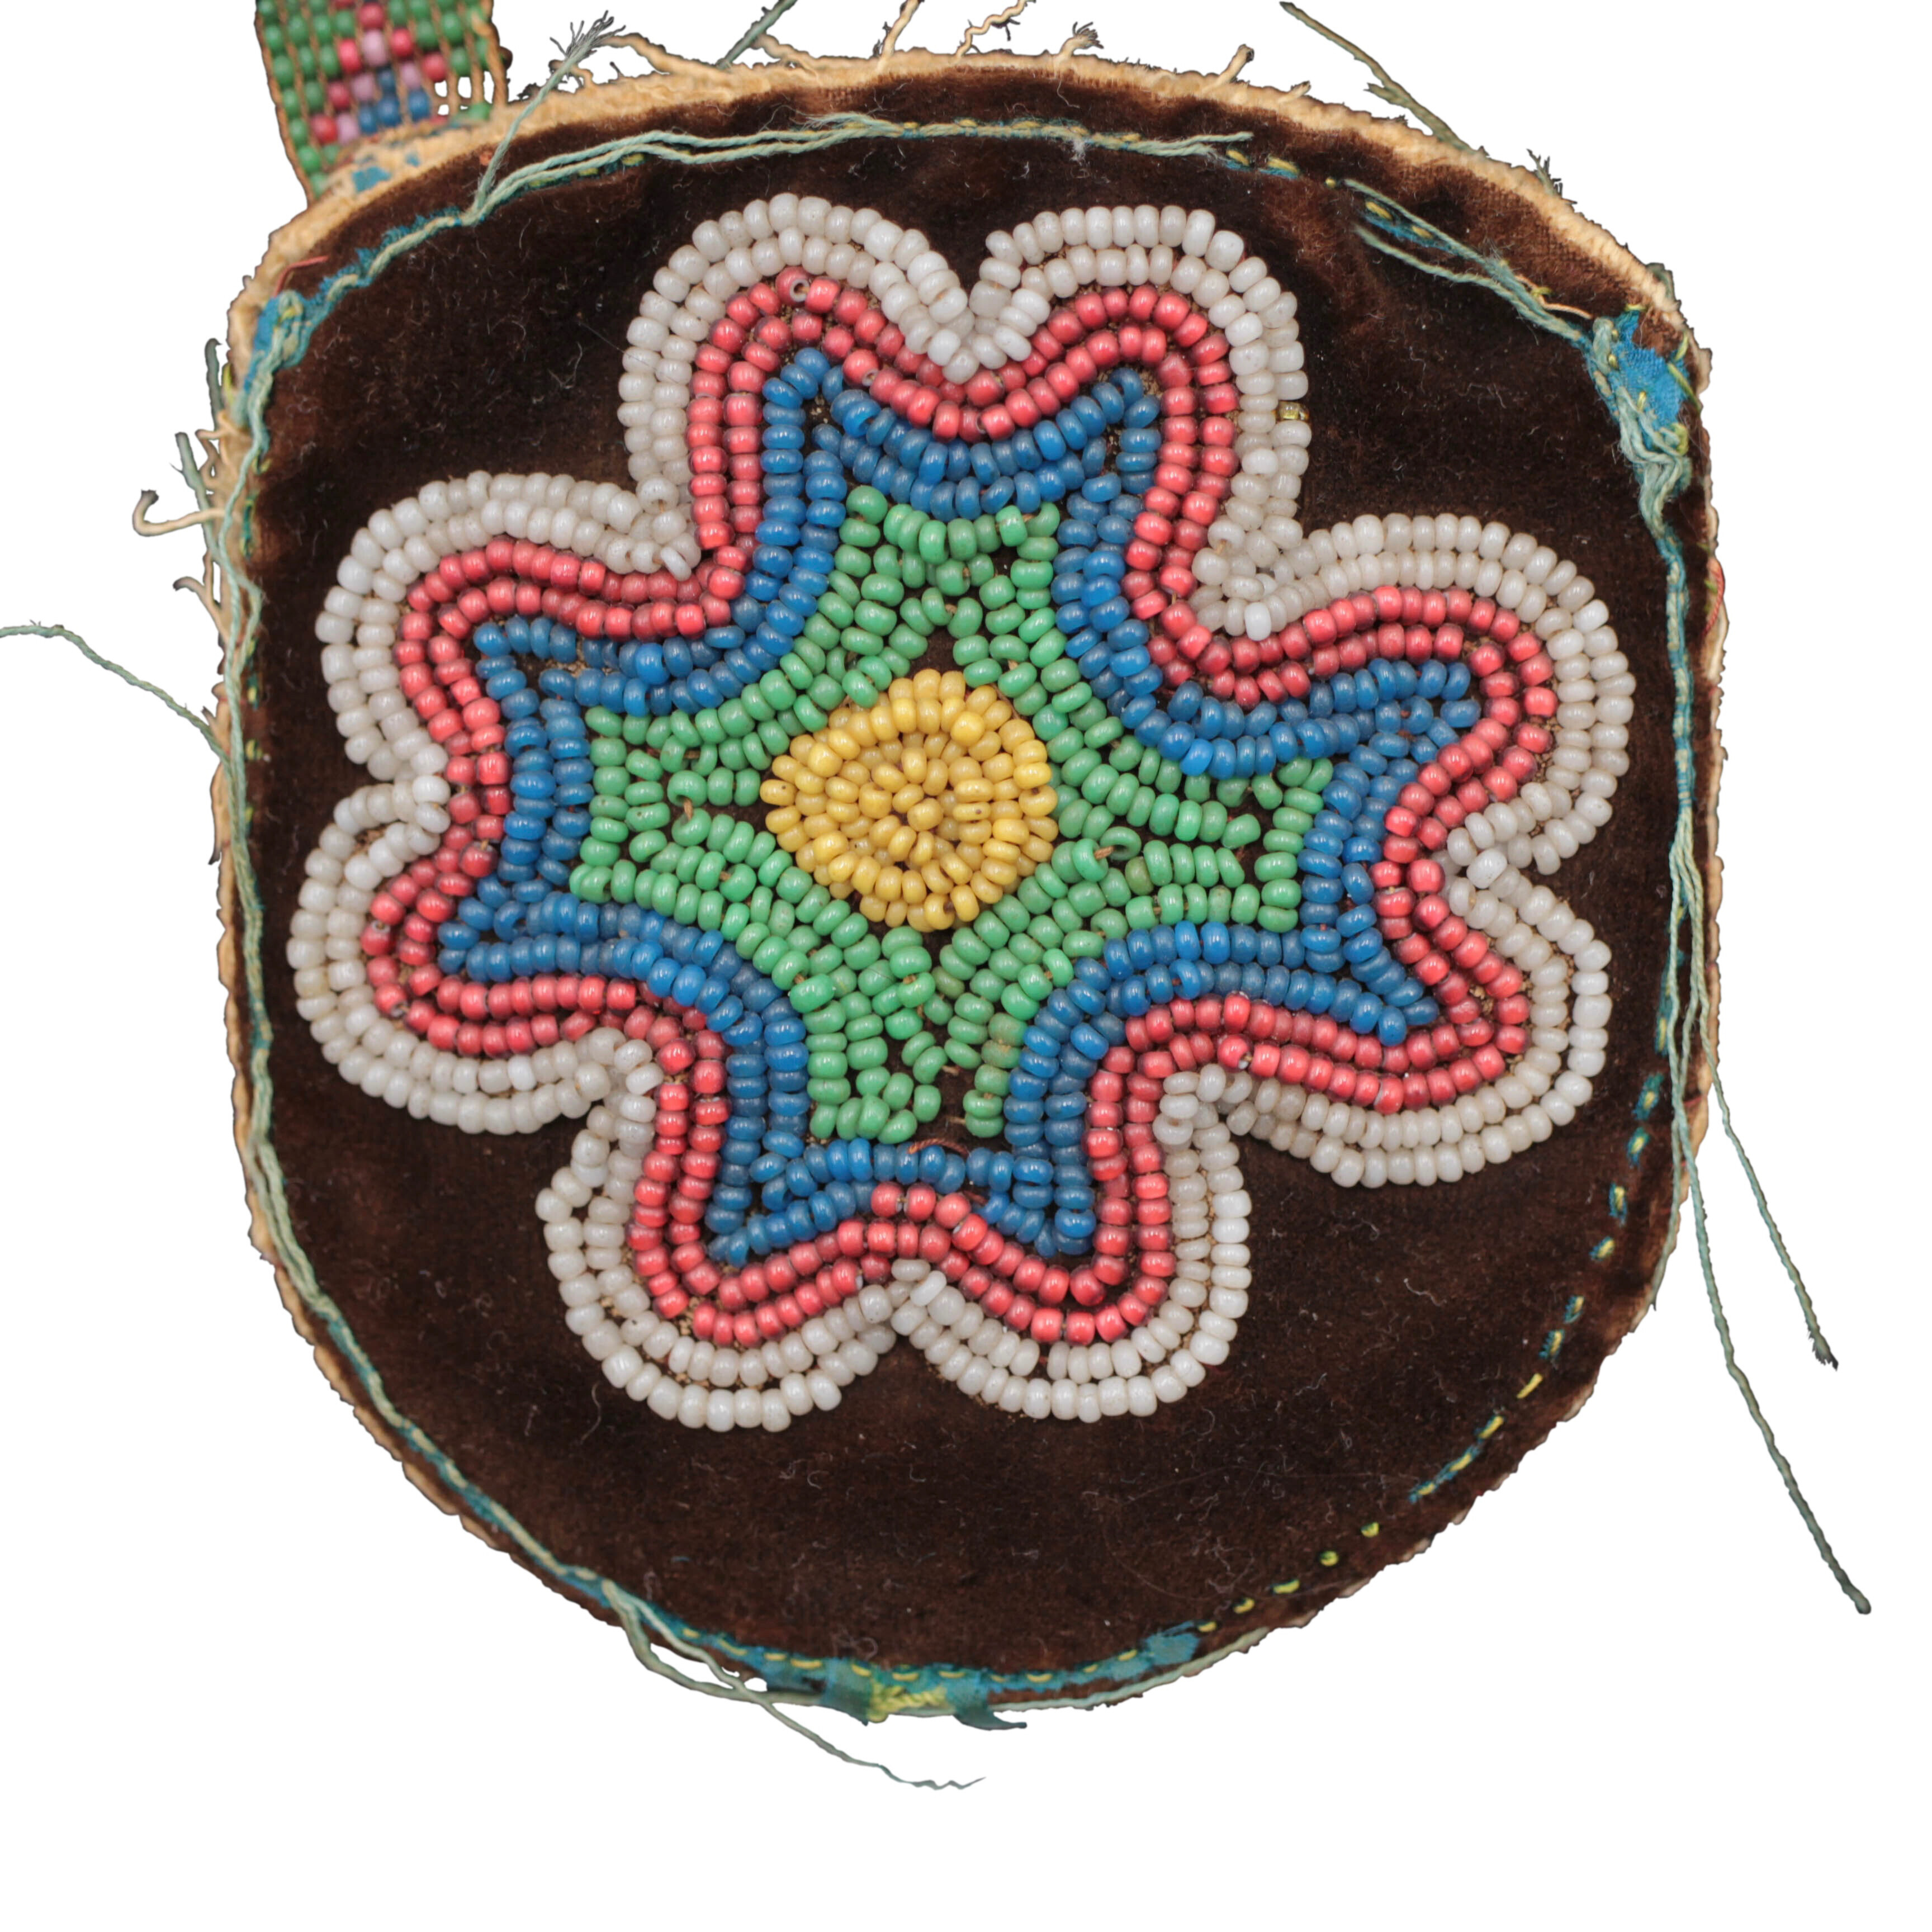 leather pouch with colorful beading in shape of a flower